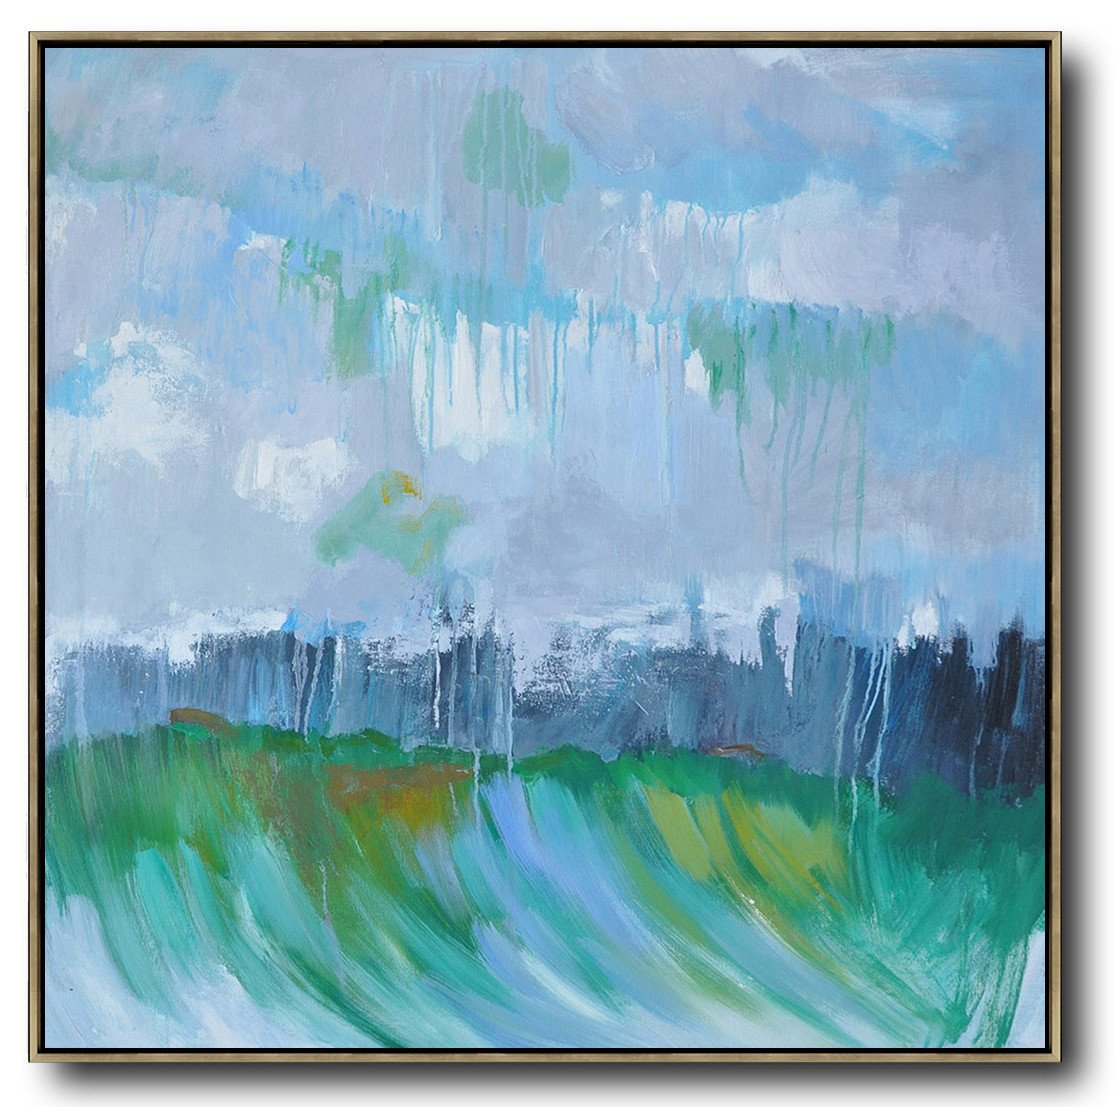 Hand-painted oversized Abstract Landscape Oil Painting by Jackson art posters for sale